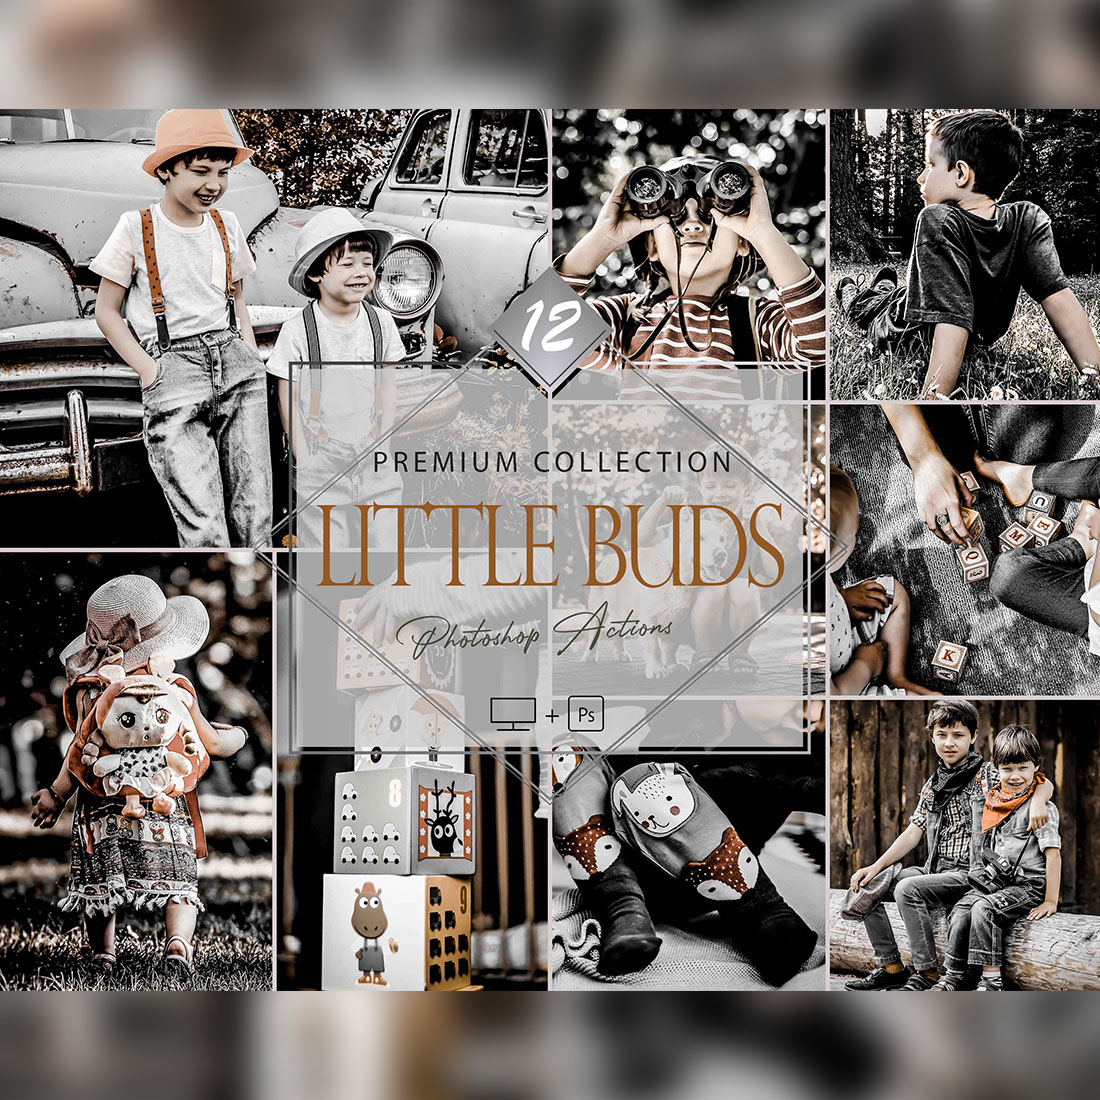 12 Photoshop Actions, Little Buds Ps Action, Moody ACR Preset, HDR Kids Filter, Lifestyle Theme For Instagram, Dark Presets, Child Portrai cover image.